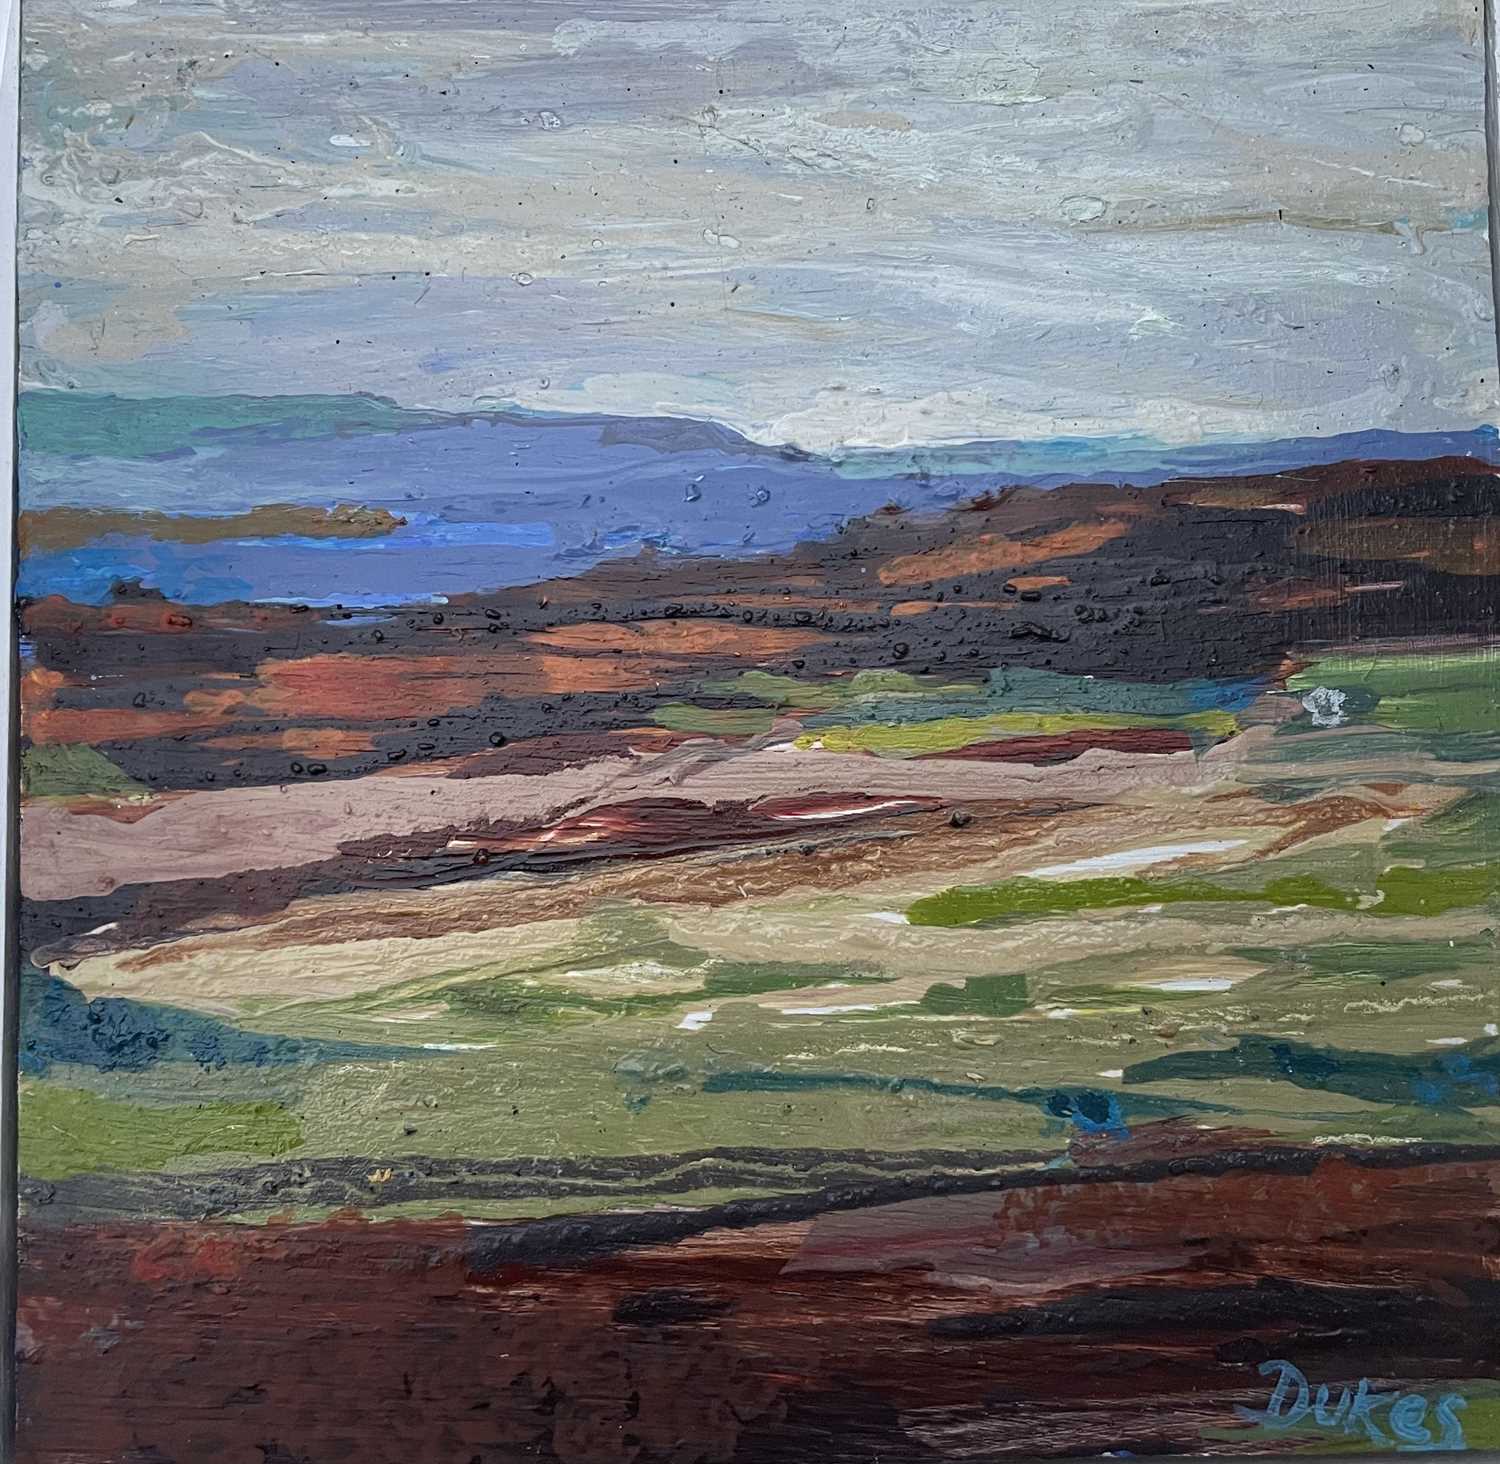 Ken Dukes. “Head of the valley”. Oil on board. 31 x 31cms. Ken Dukes studied at Swansea College of